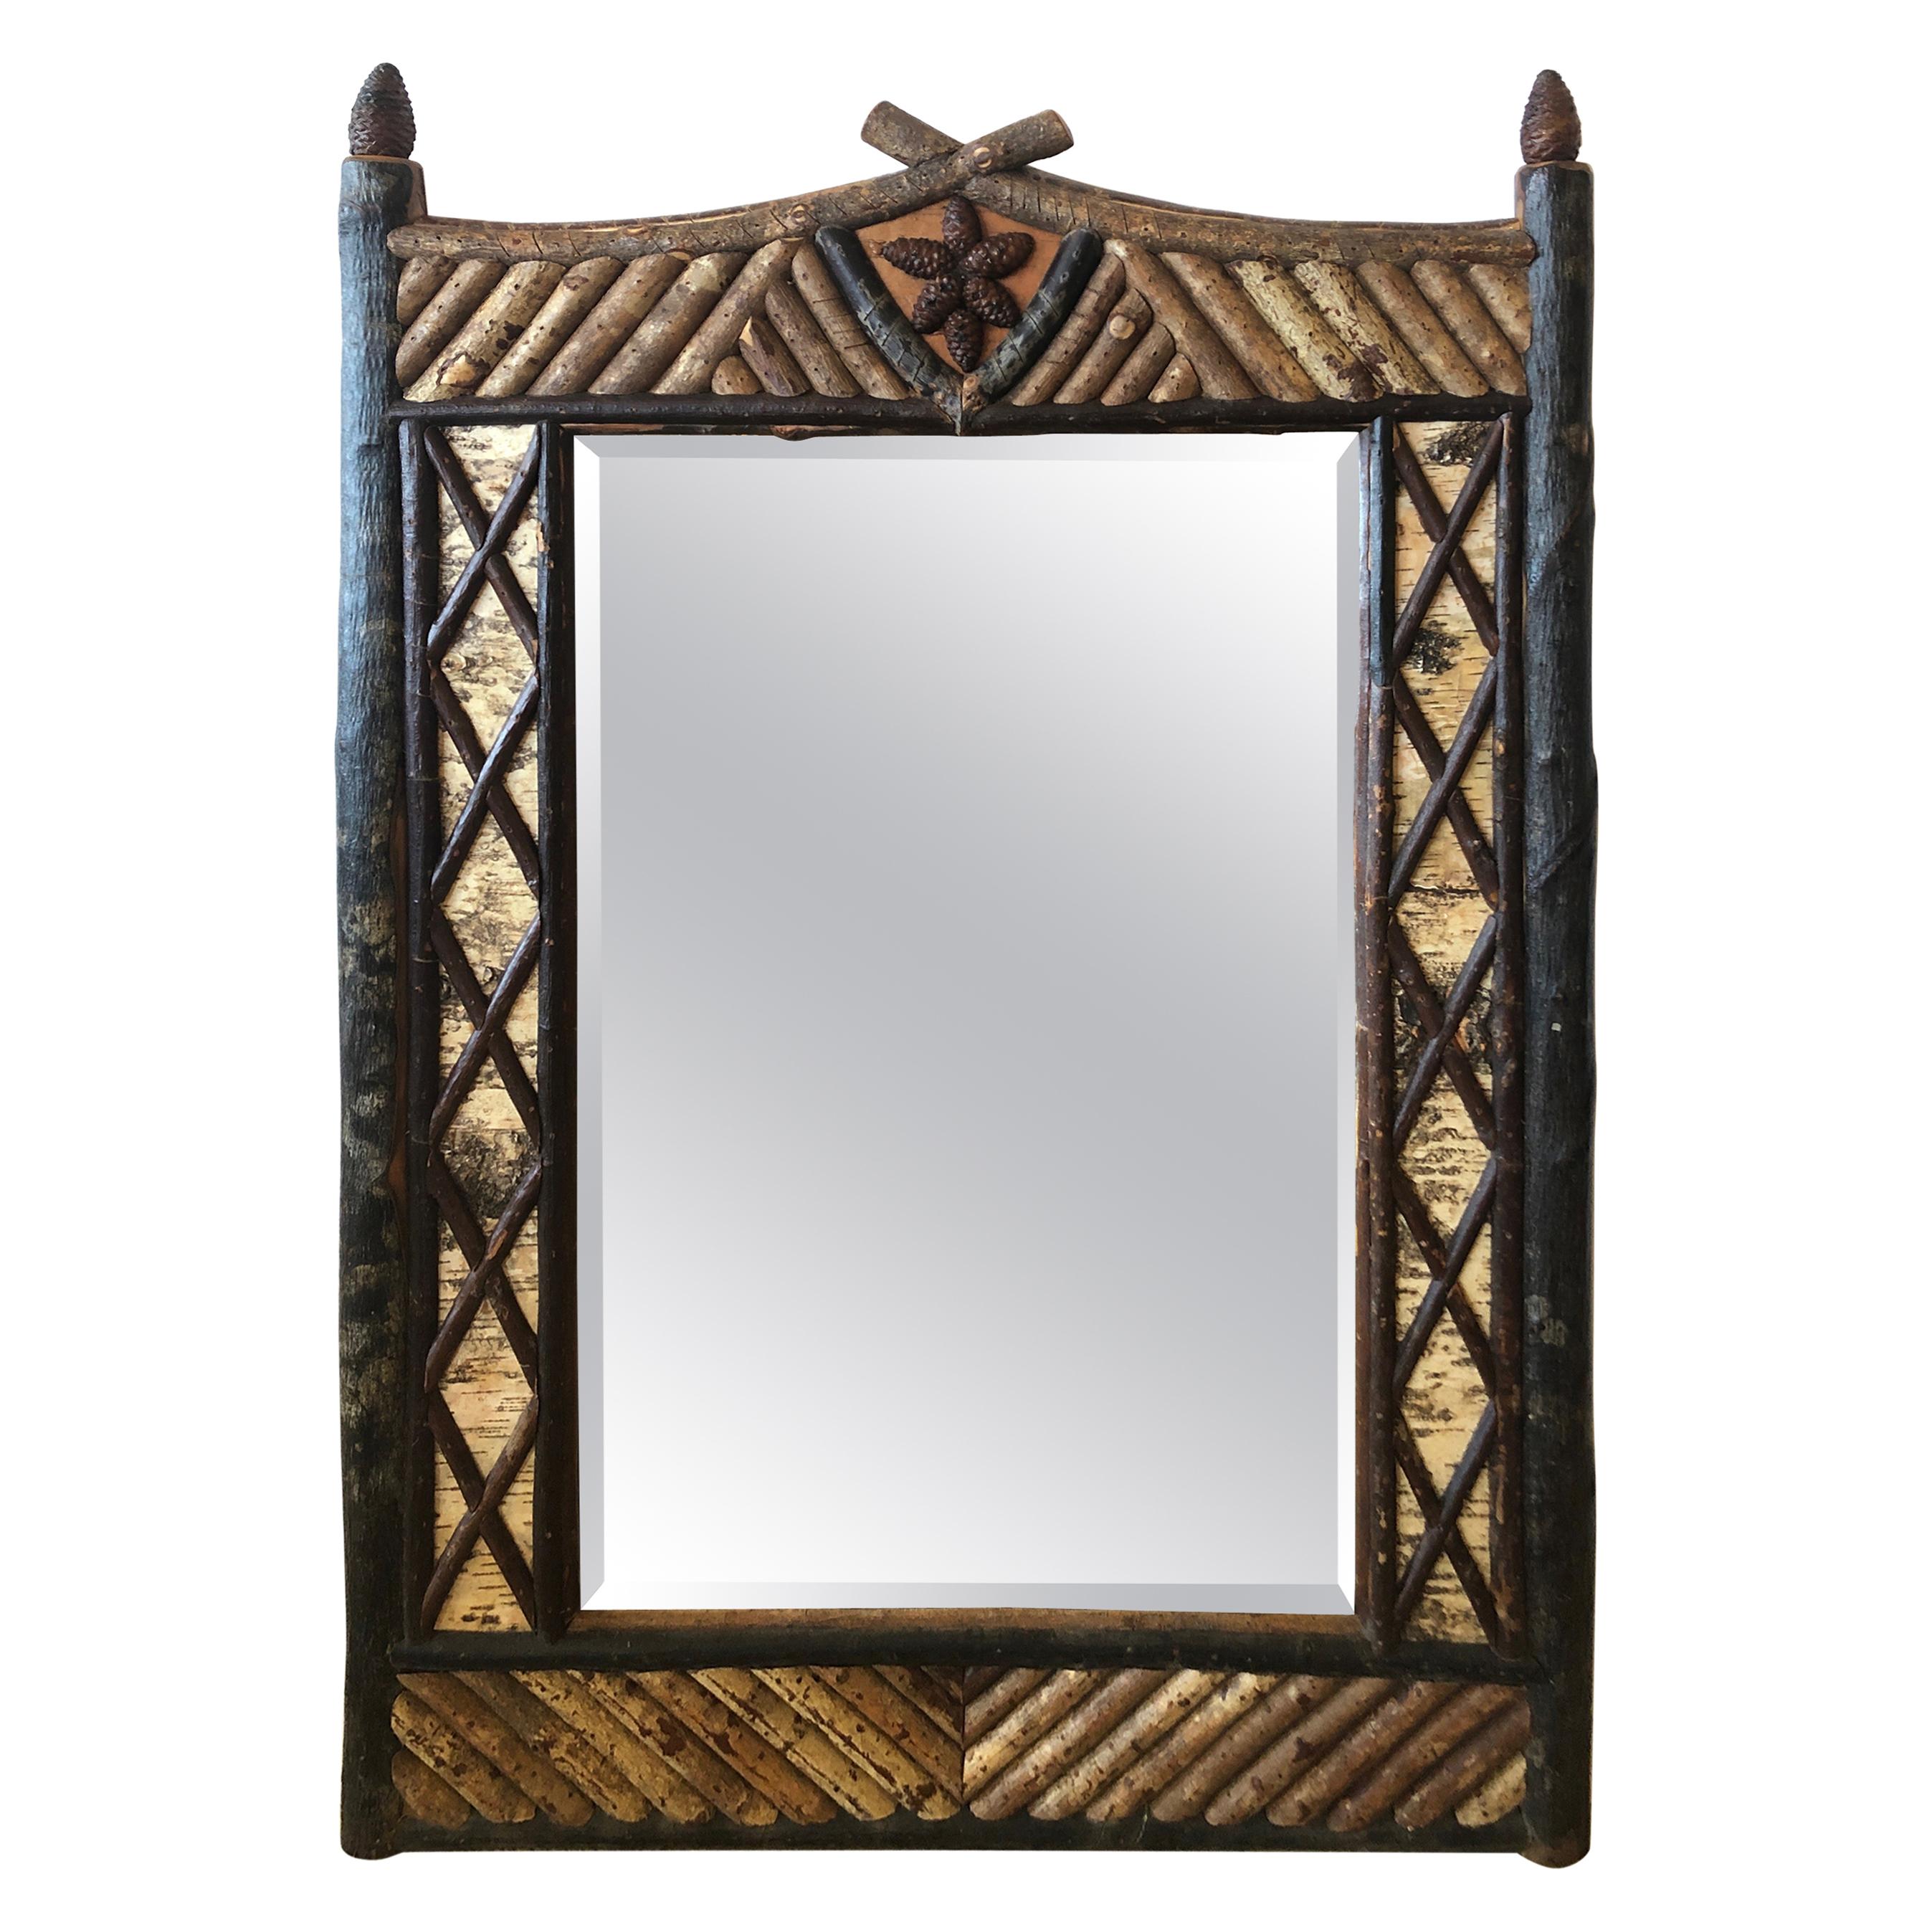 Rustic Tramp Art Faux Bois Mirror with Birch Paper and Twigs